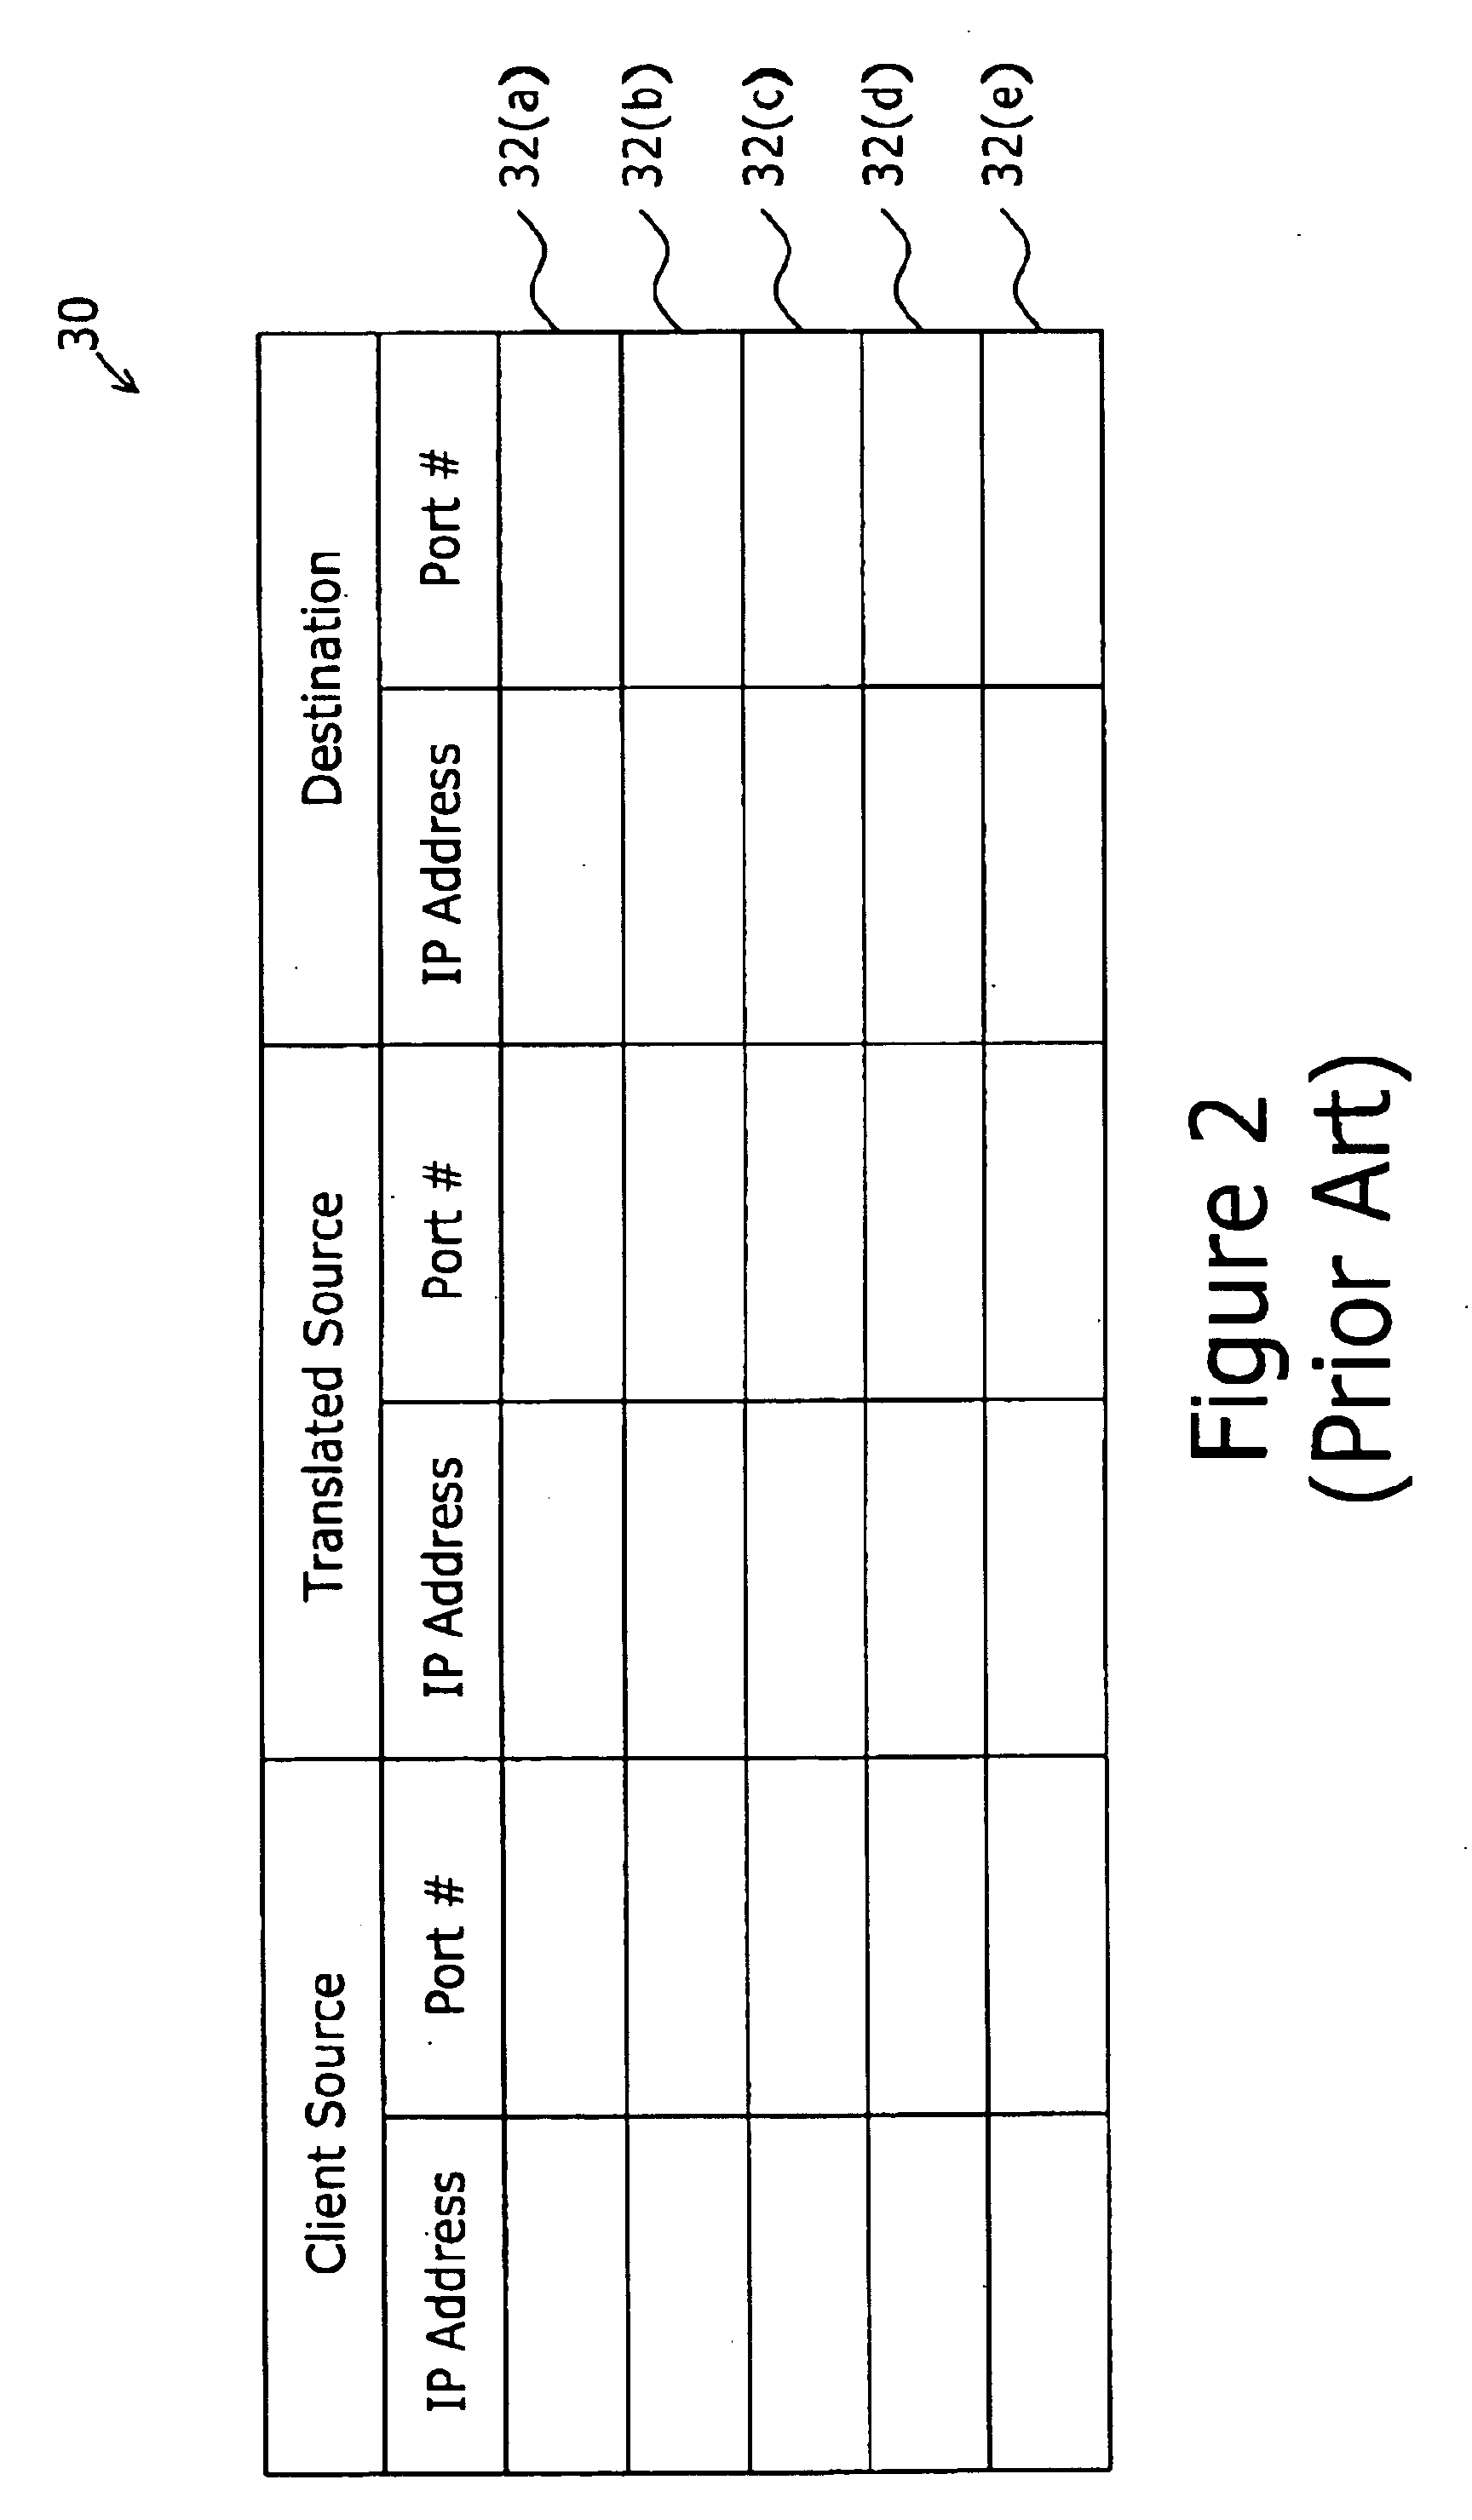 System and method for determining a connectionless communication path for communicating audio data through an address and port translation device